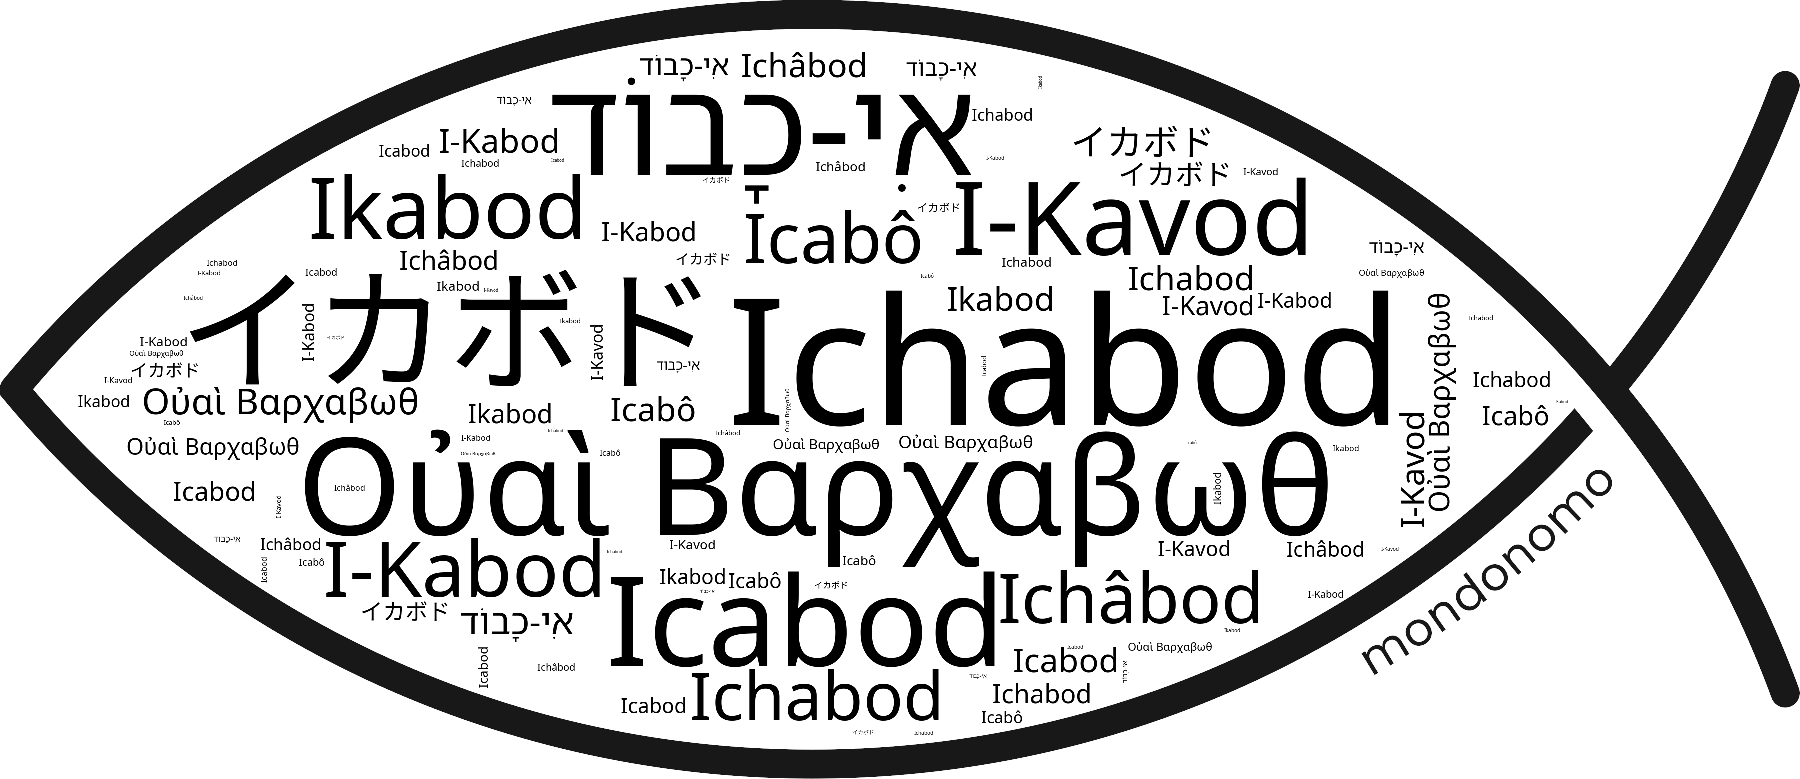 Name Ichabod in the world's Bibles